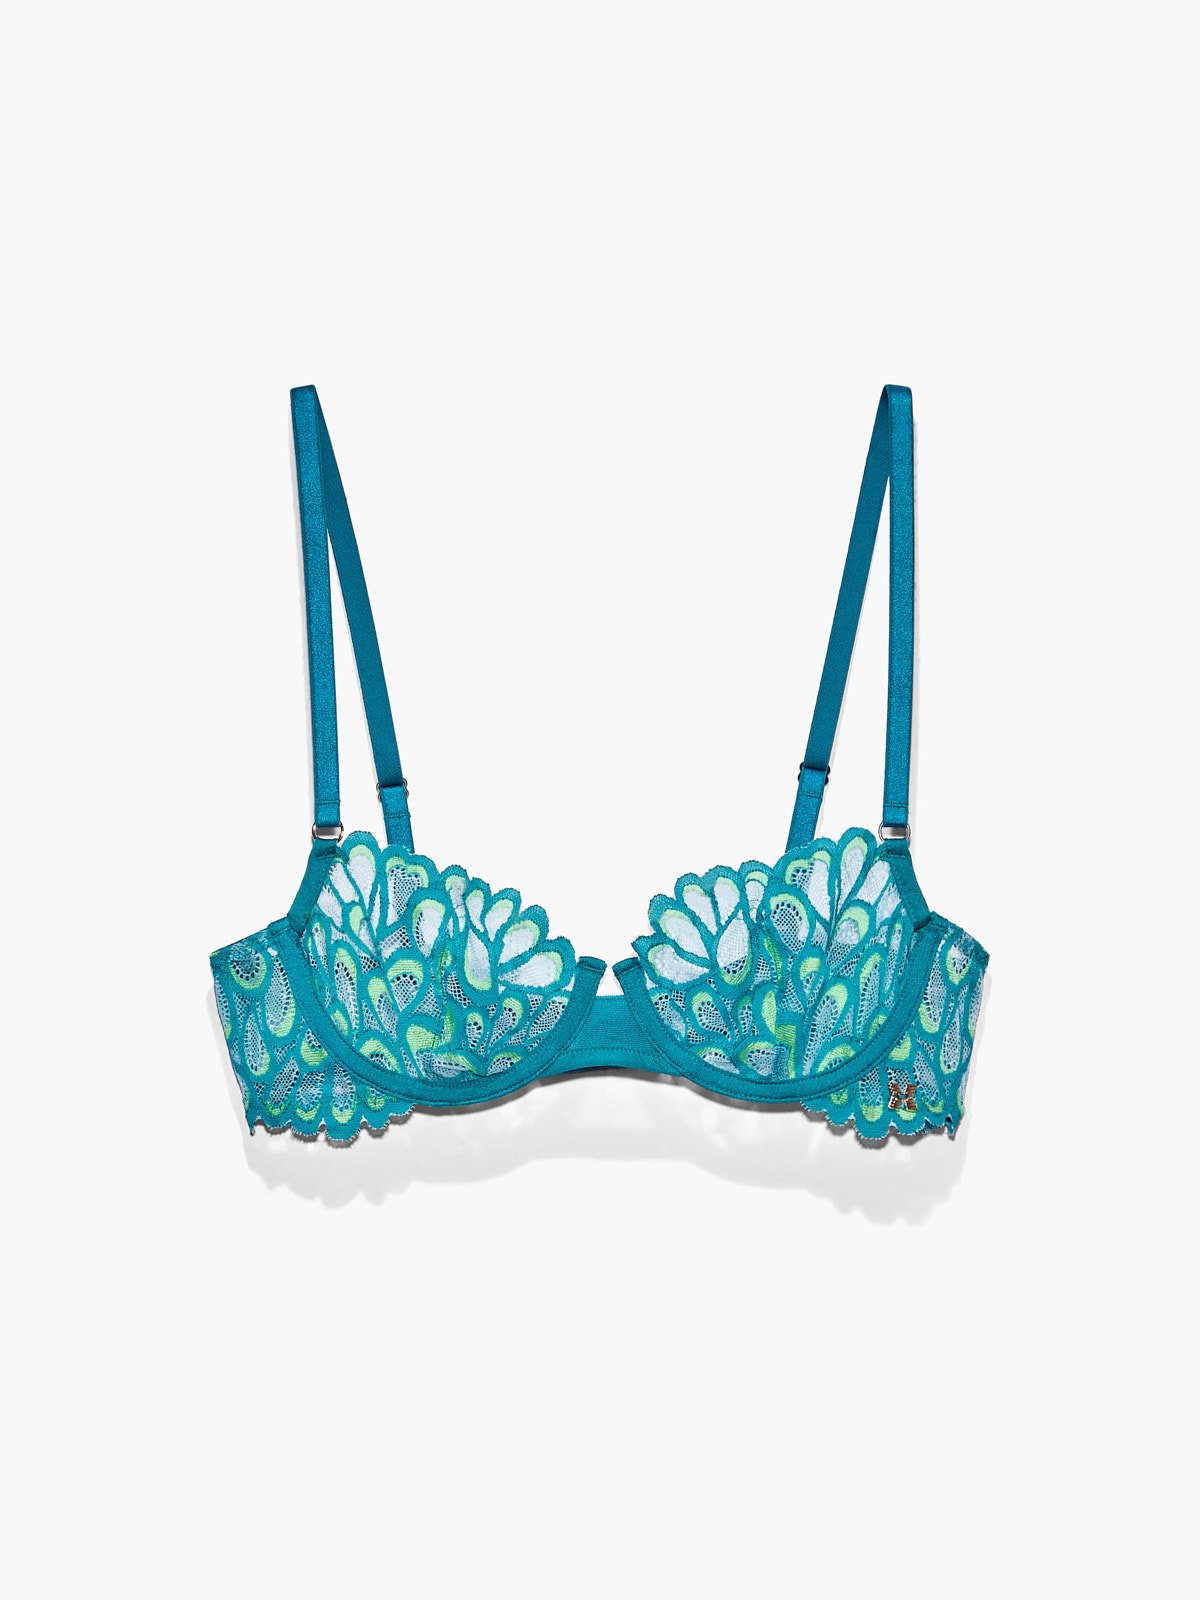 Savage Not Sorry Unlined Lace Balconette Bra in Blue